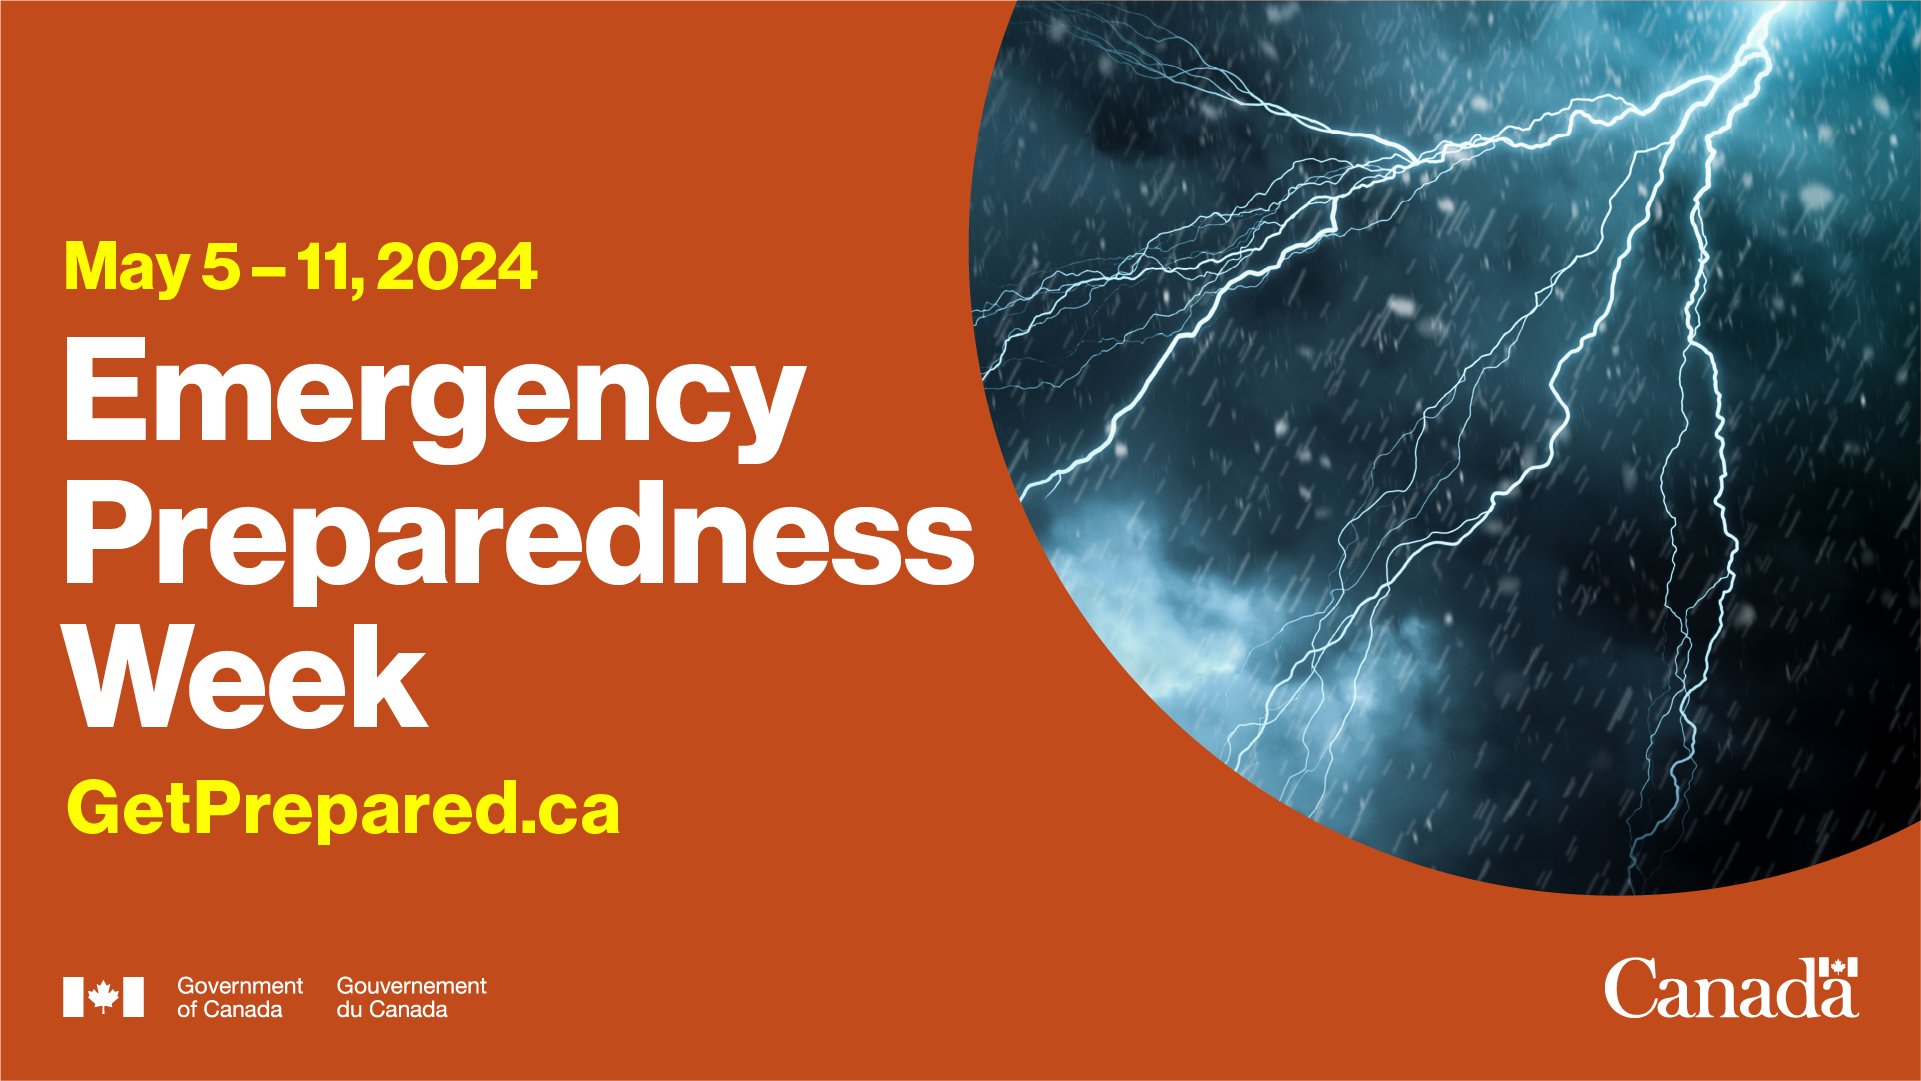 Orange background with image of lightening in the sky with text "Mary 5-11, 2024 Emergency Preparedness Week GetPrepared.ca"